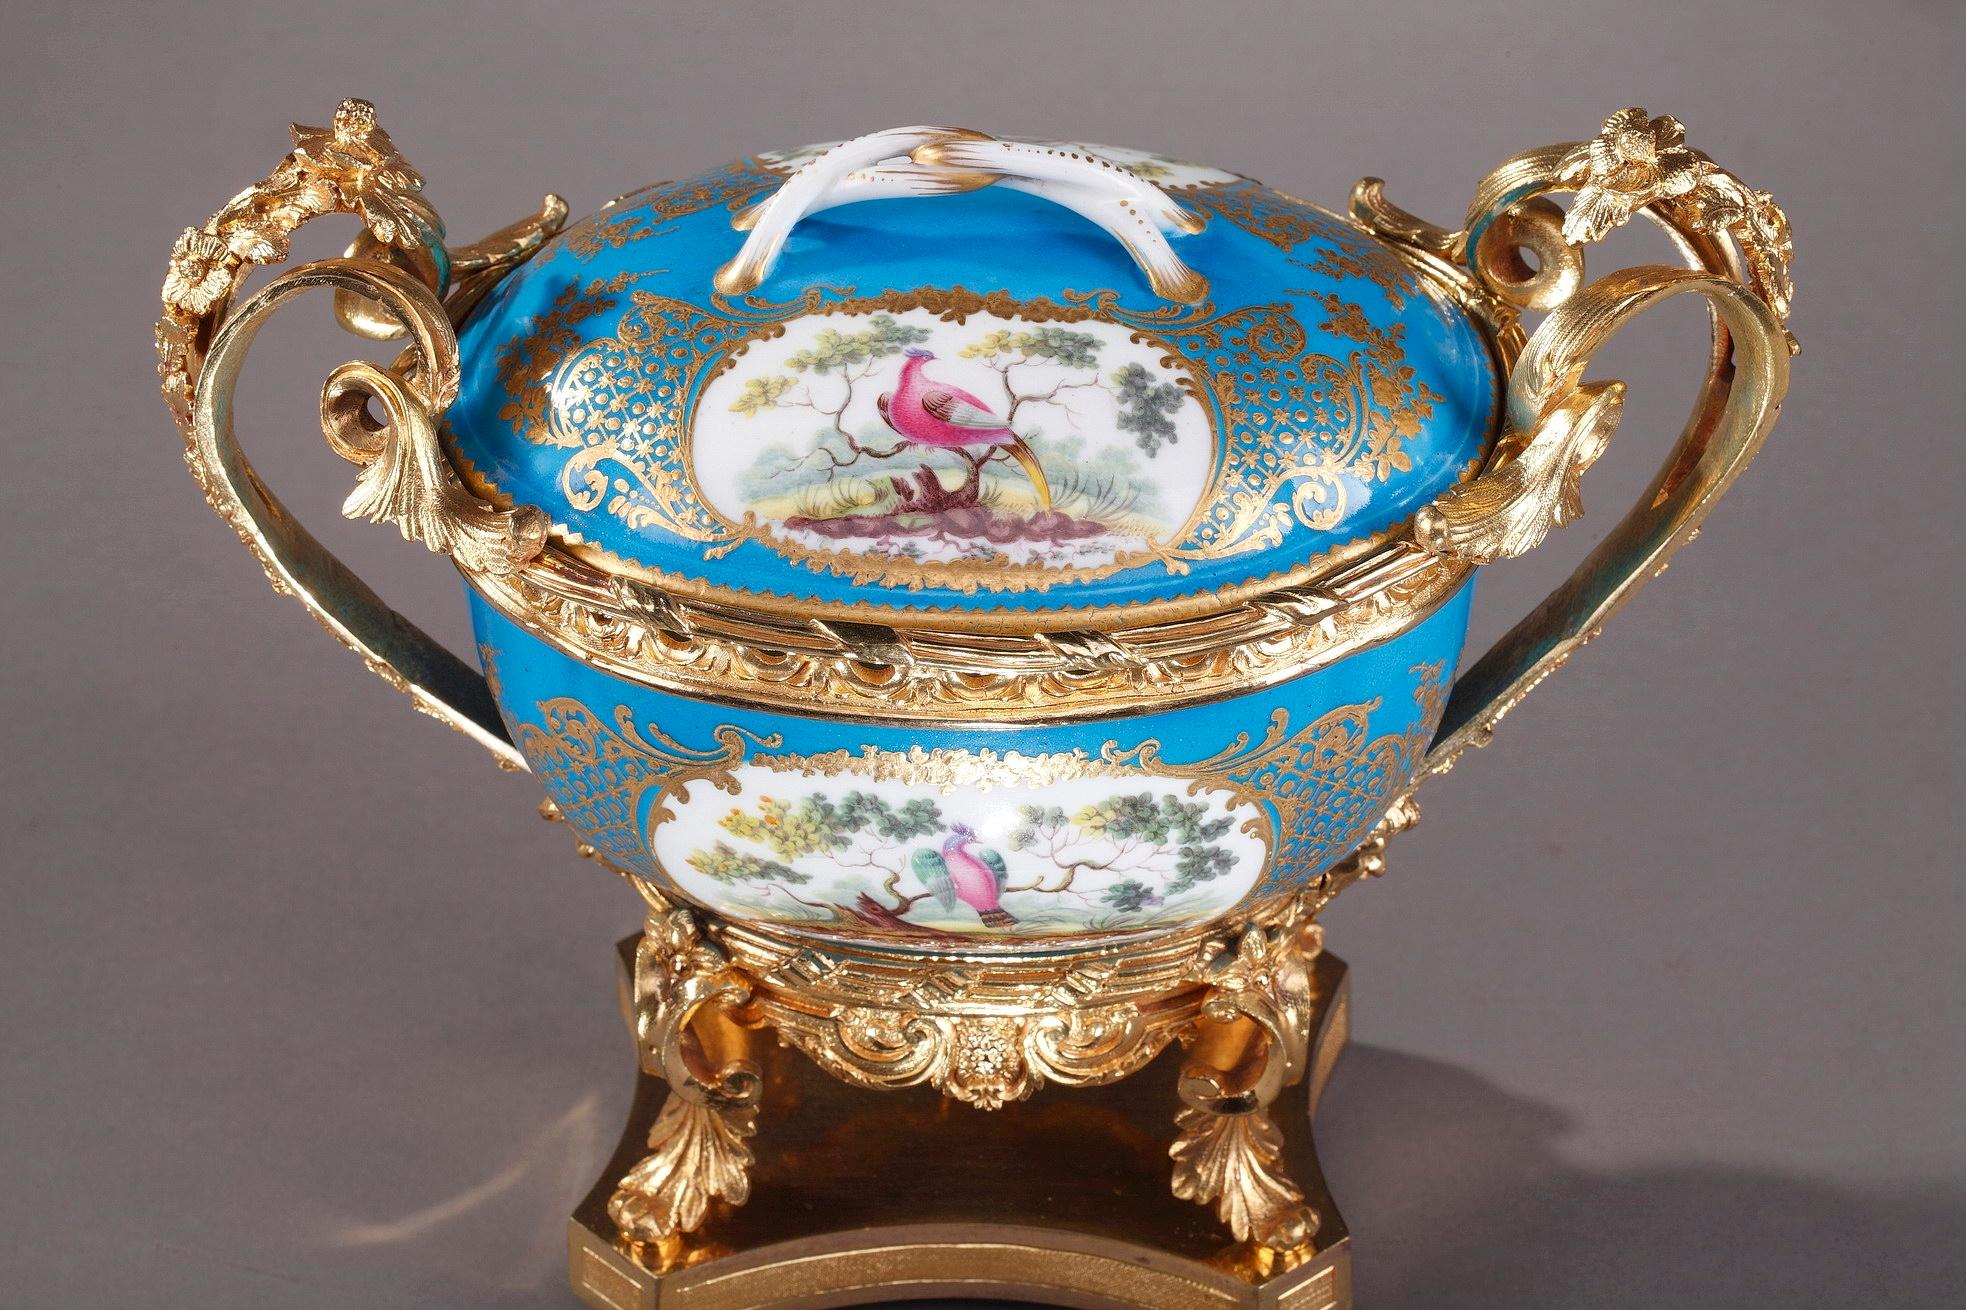 Small bronze-mounted porcelain covered pot in Sevres style. The turquoise, or bleu celeste, background highlights the exquisite polychromatic plaques featuring birds on branches, surrounded by foliated gilt borders. Bronze ormolu stands, richly